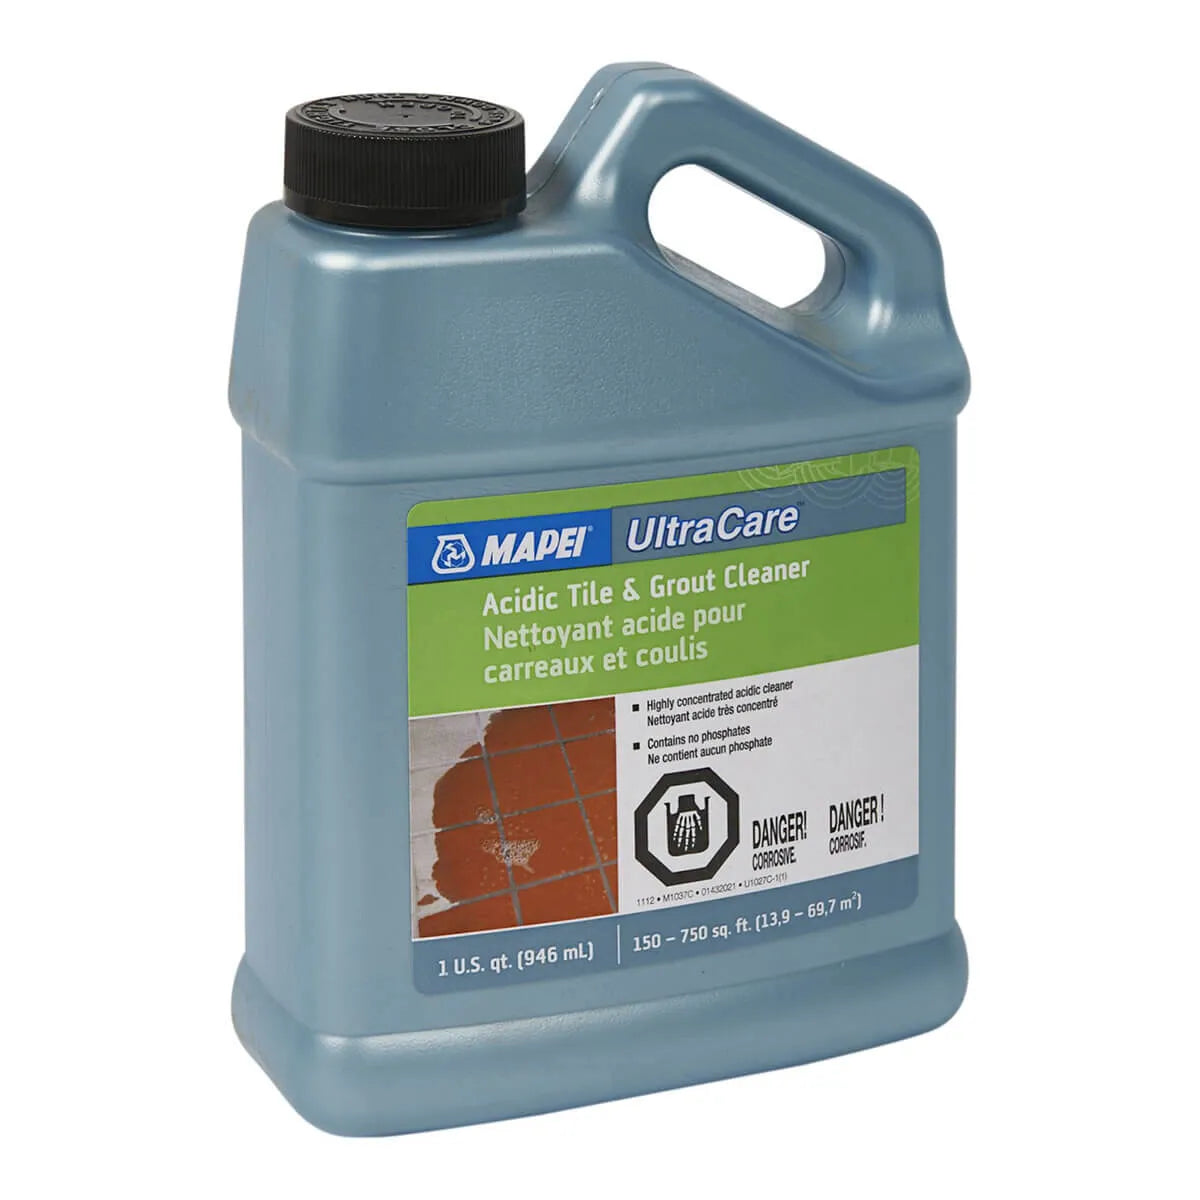 Mapei Ultracare Acidic Tile & Grout Cleaner - 1 Quart